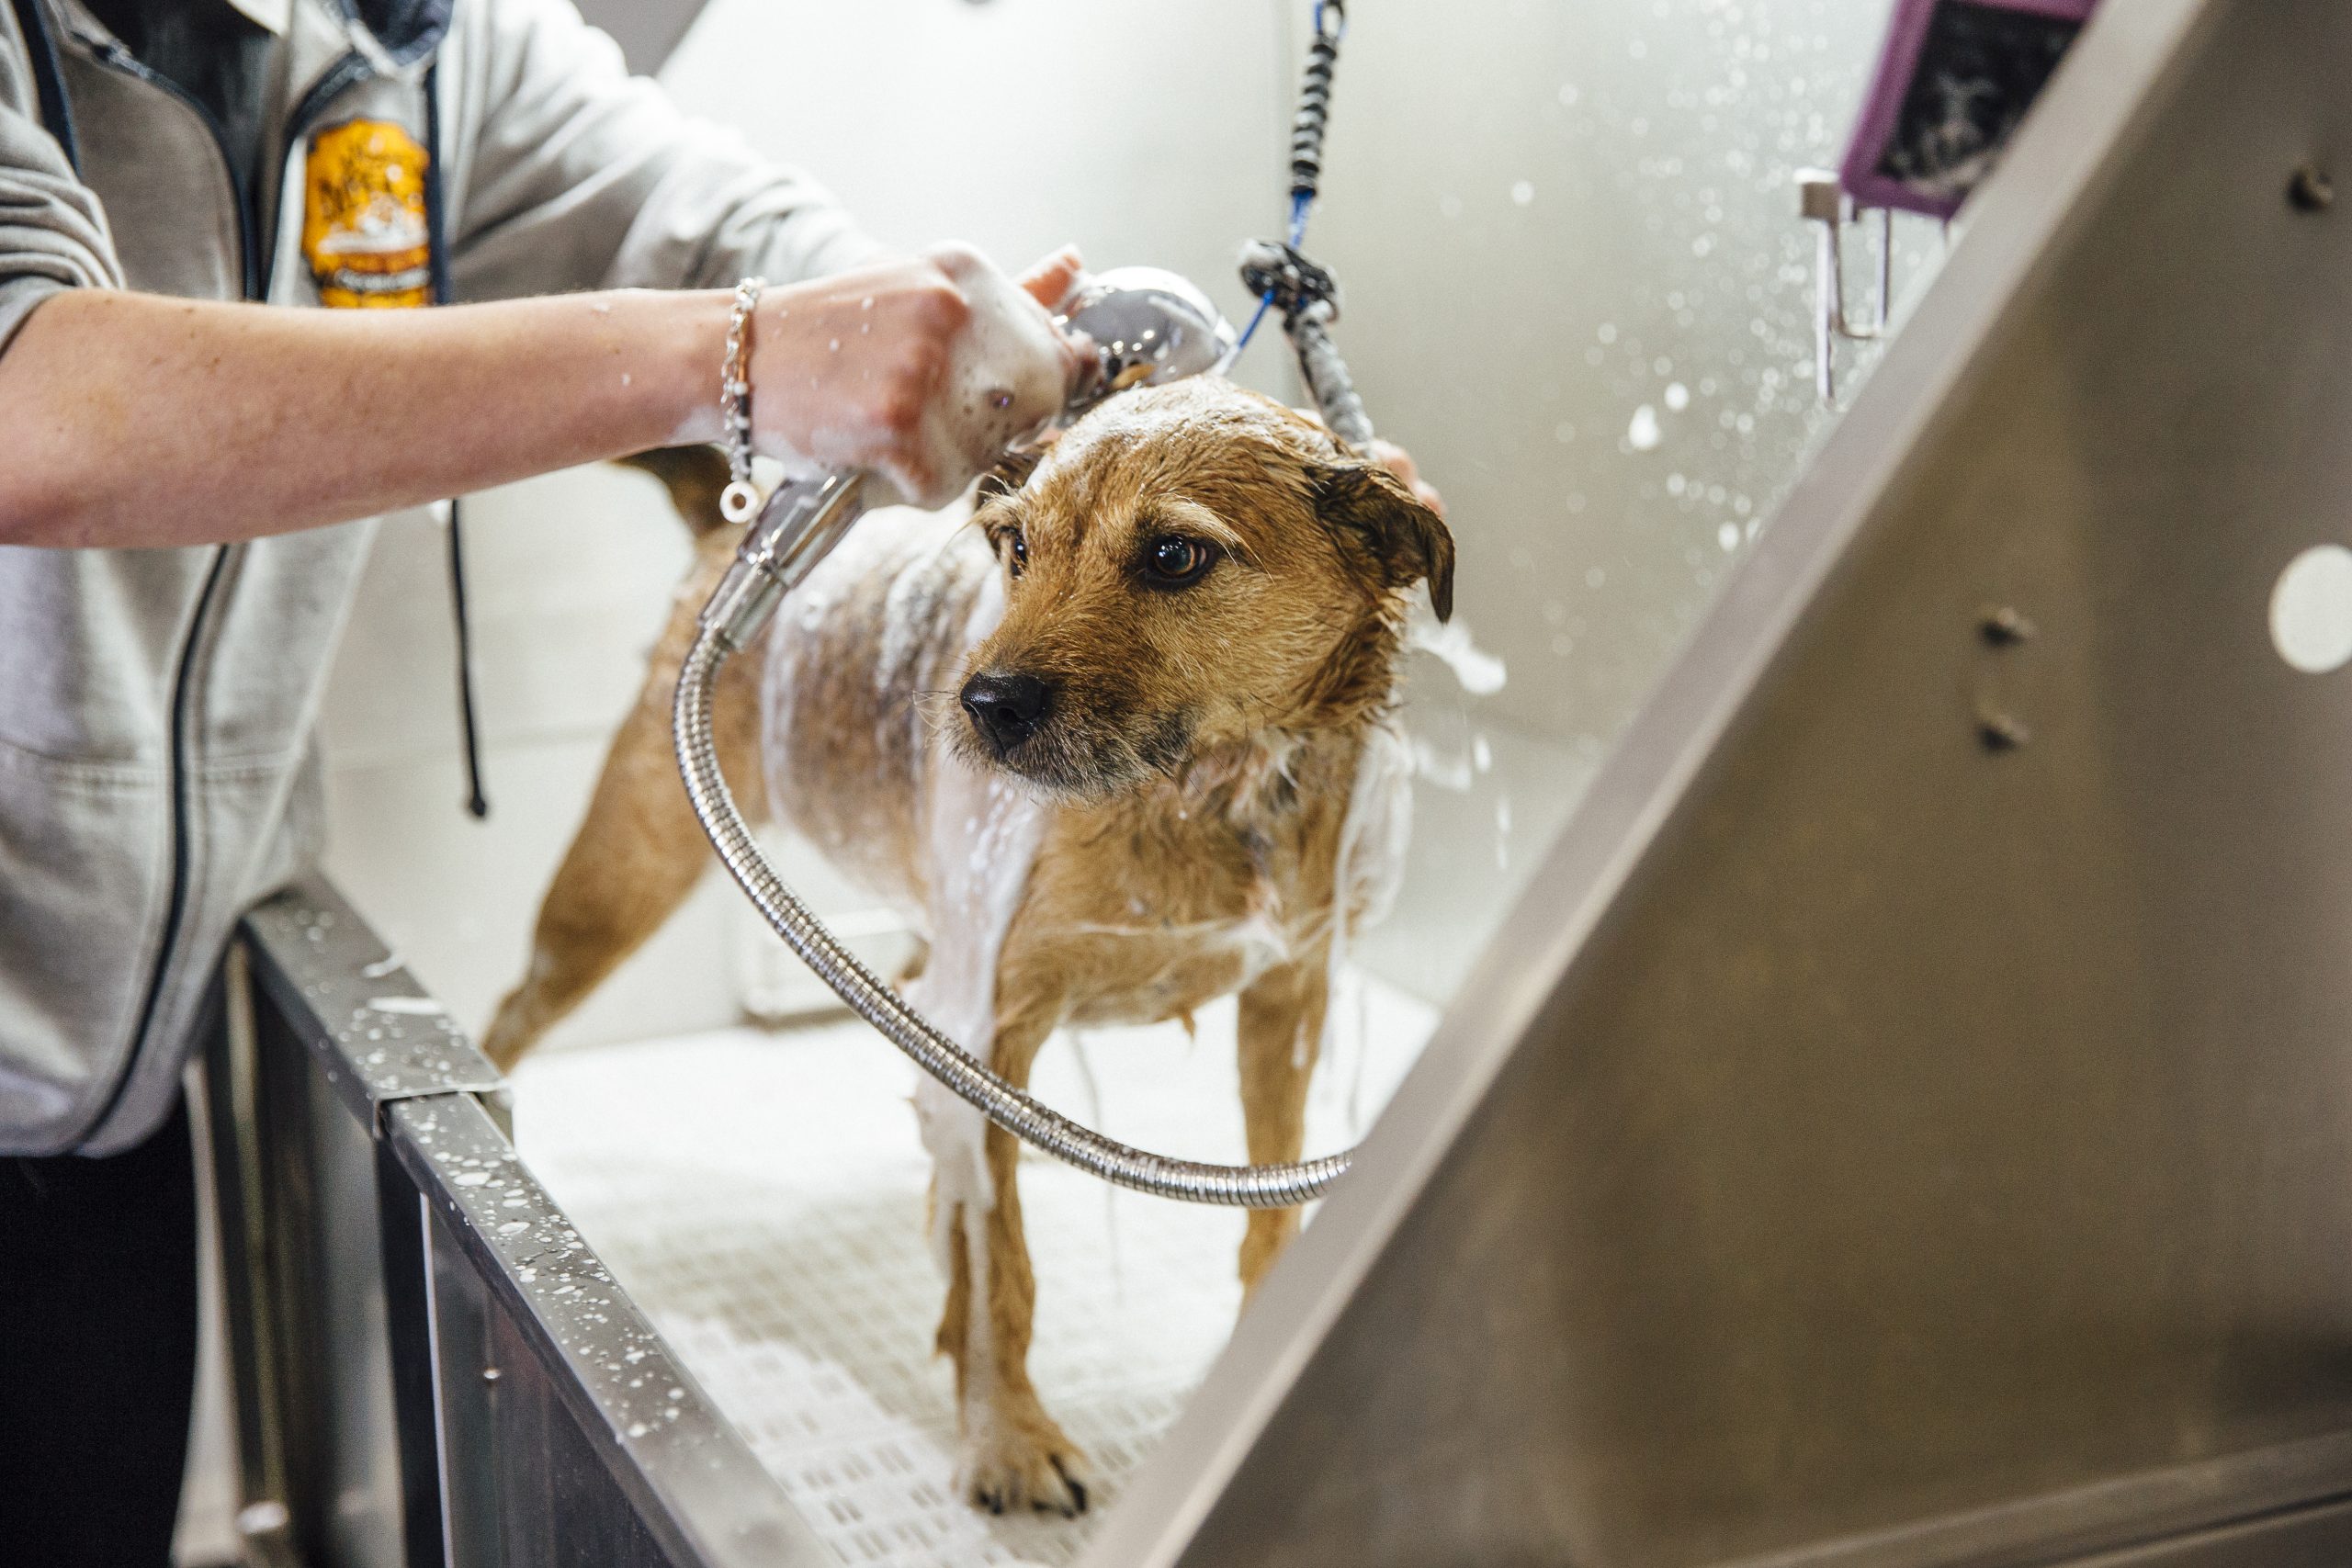 Terrier dog is standing in a wash basin, getting shampooed and rinsed by the dog groomer.